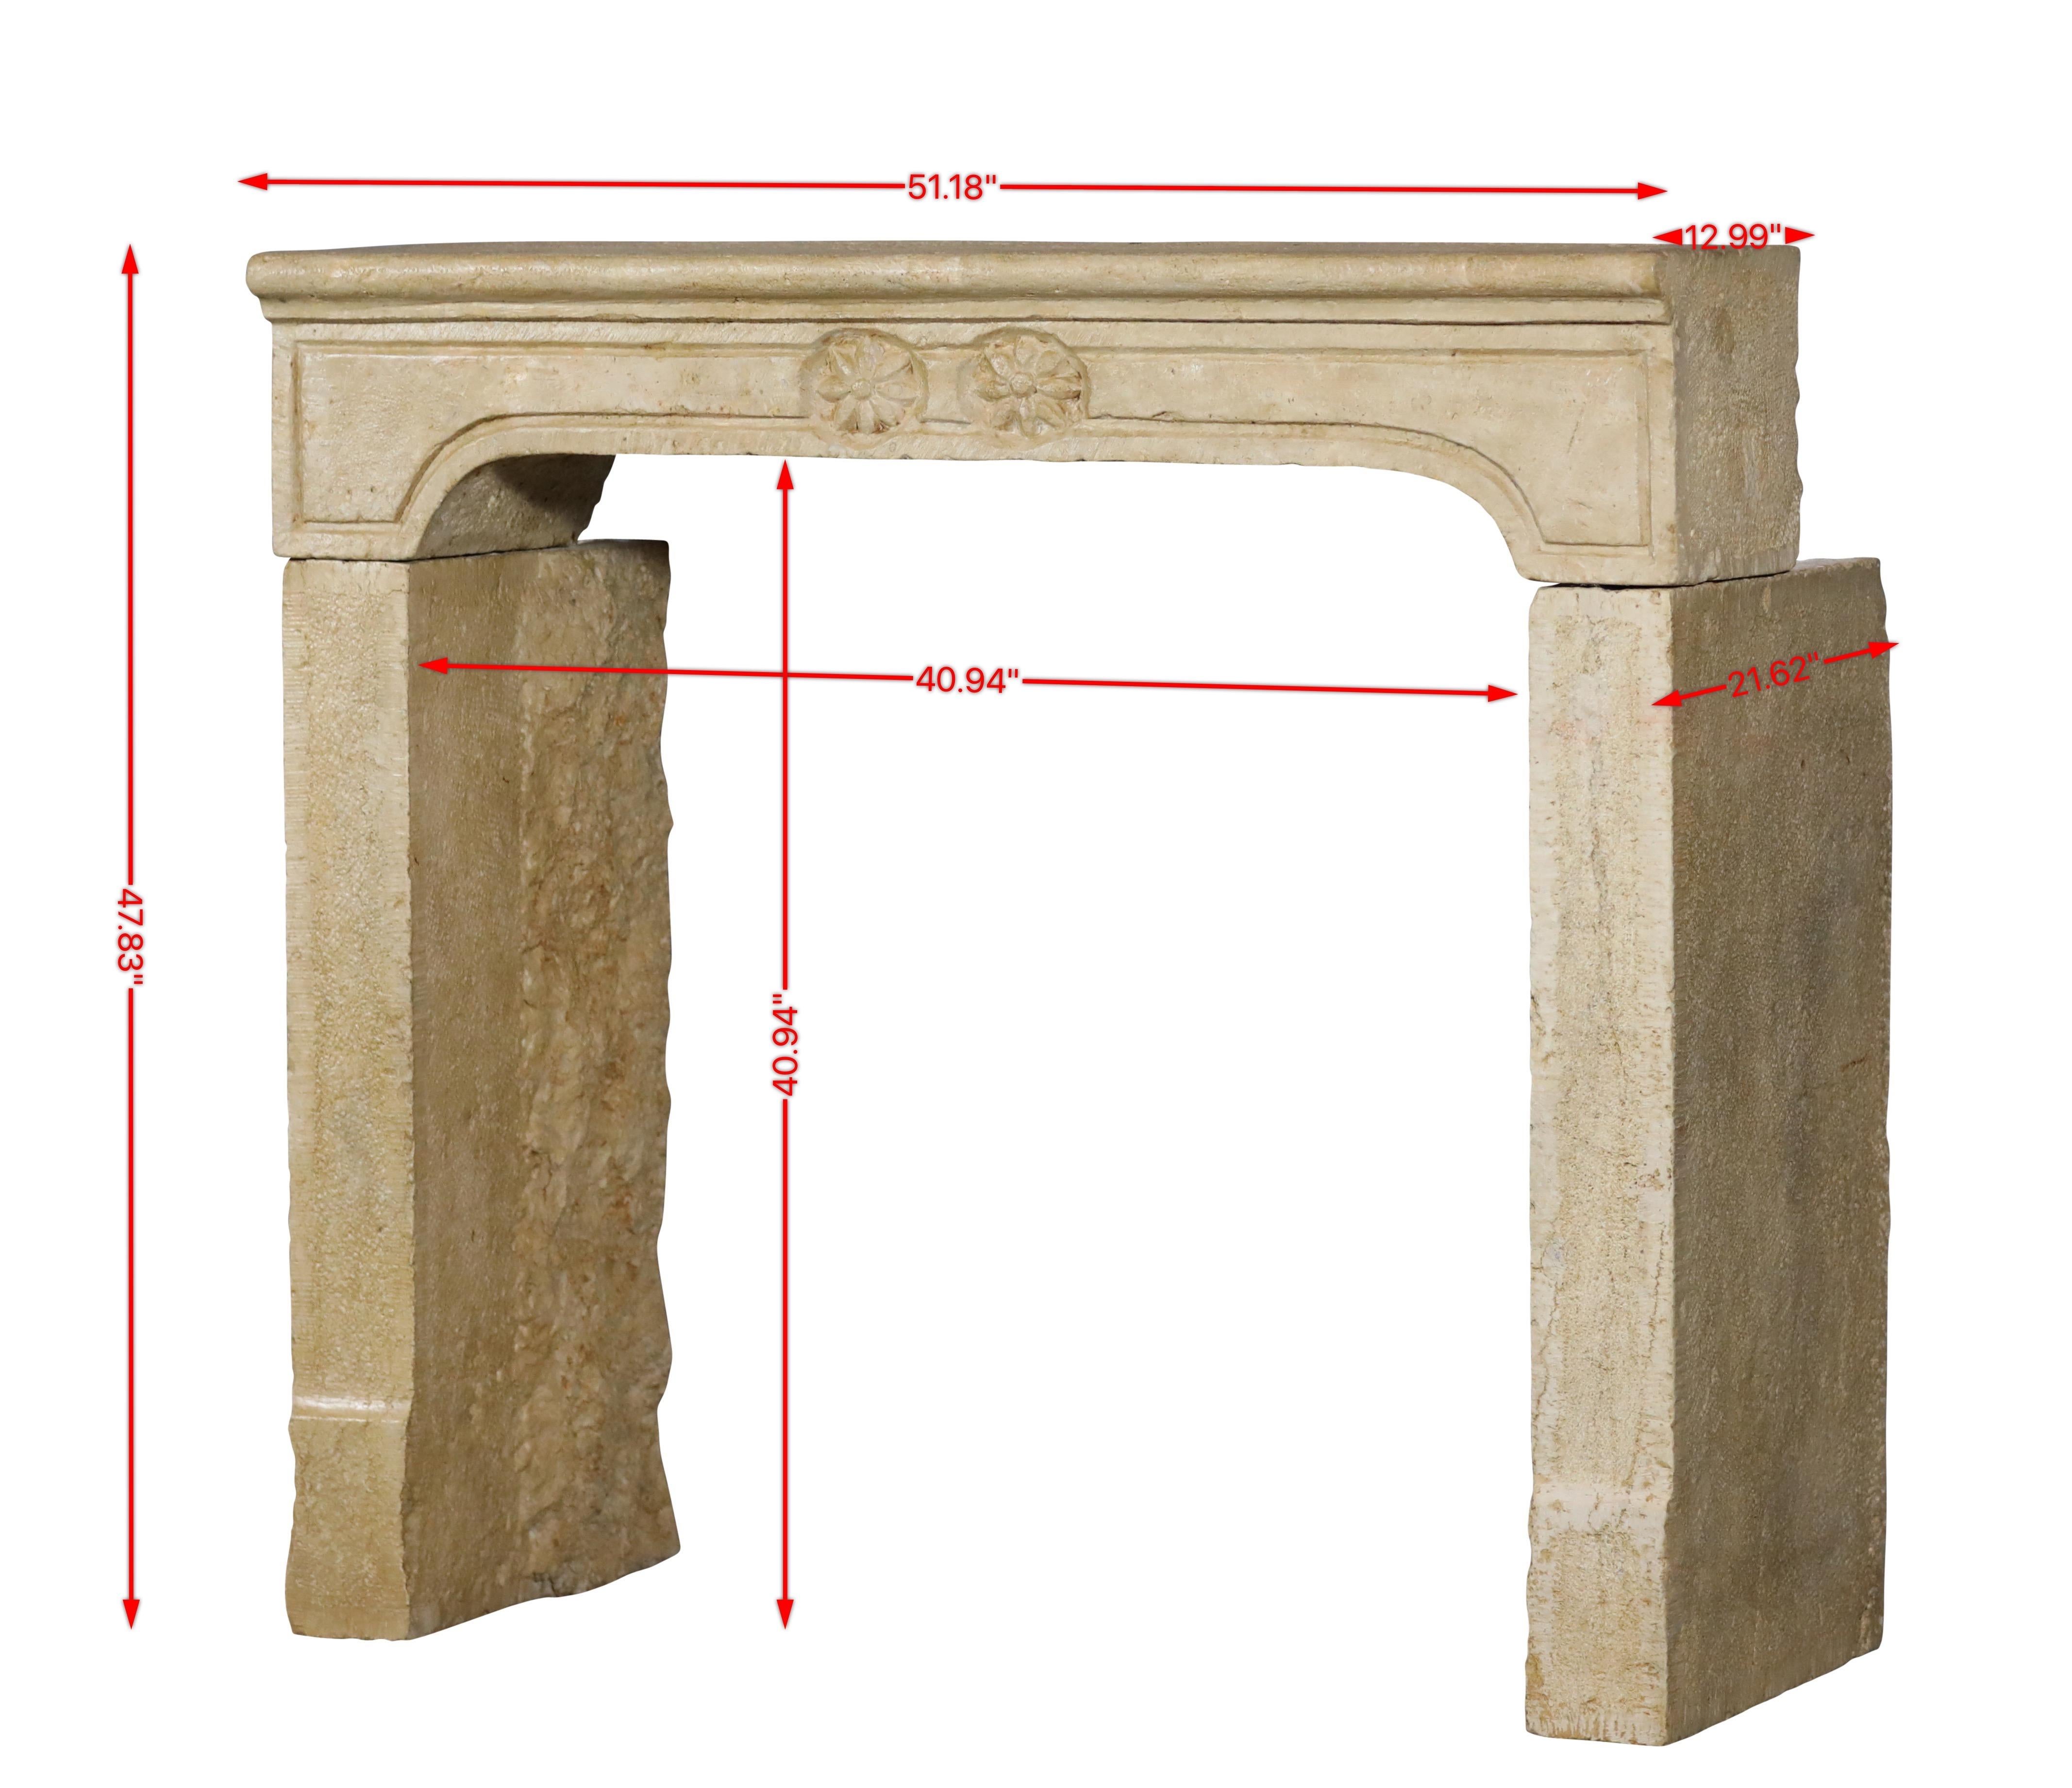 Rustic French feeling limestone fireplace surround from the 17th century.
Rare brutalist design.
Original fireplace mantle for authentic interior design.
Measurements:
130 cm Exterior Width 51,18 Inch
121,5 cm Exterior Height 47,83 Inch
104 cm